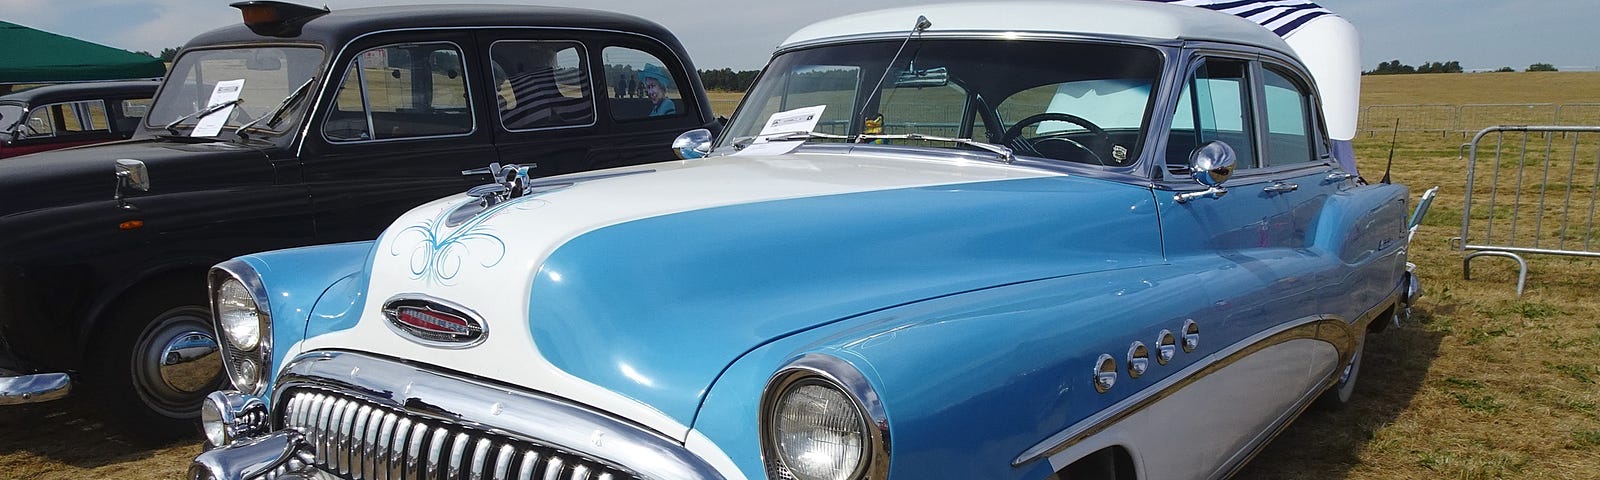 A 1953 Buick Sedan which was famous for having a V8 engine parked in a field at a car show. It is very similar to the Buick my brother and I used to work on together.